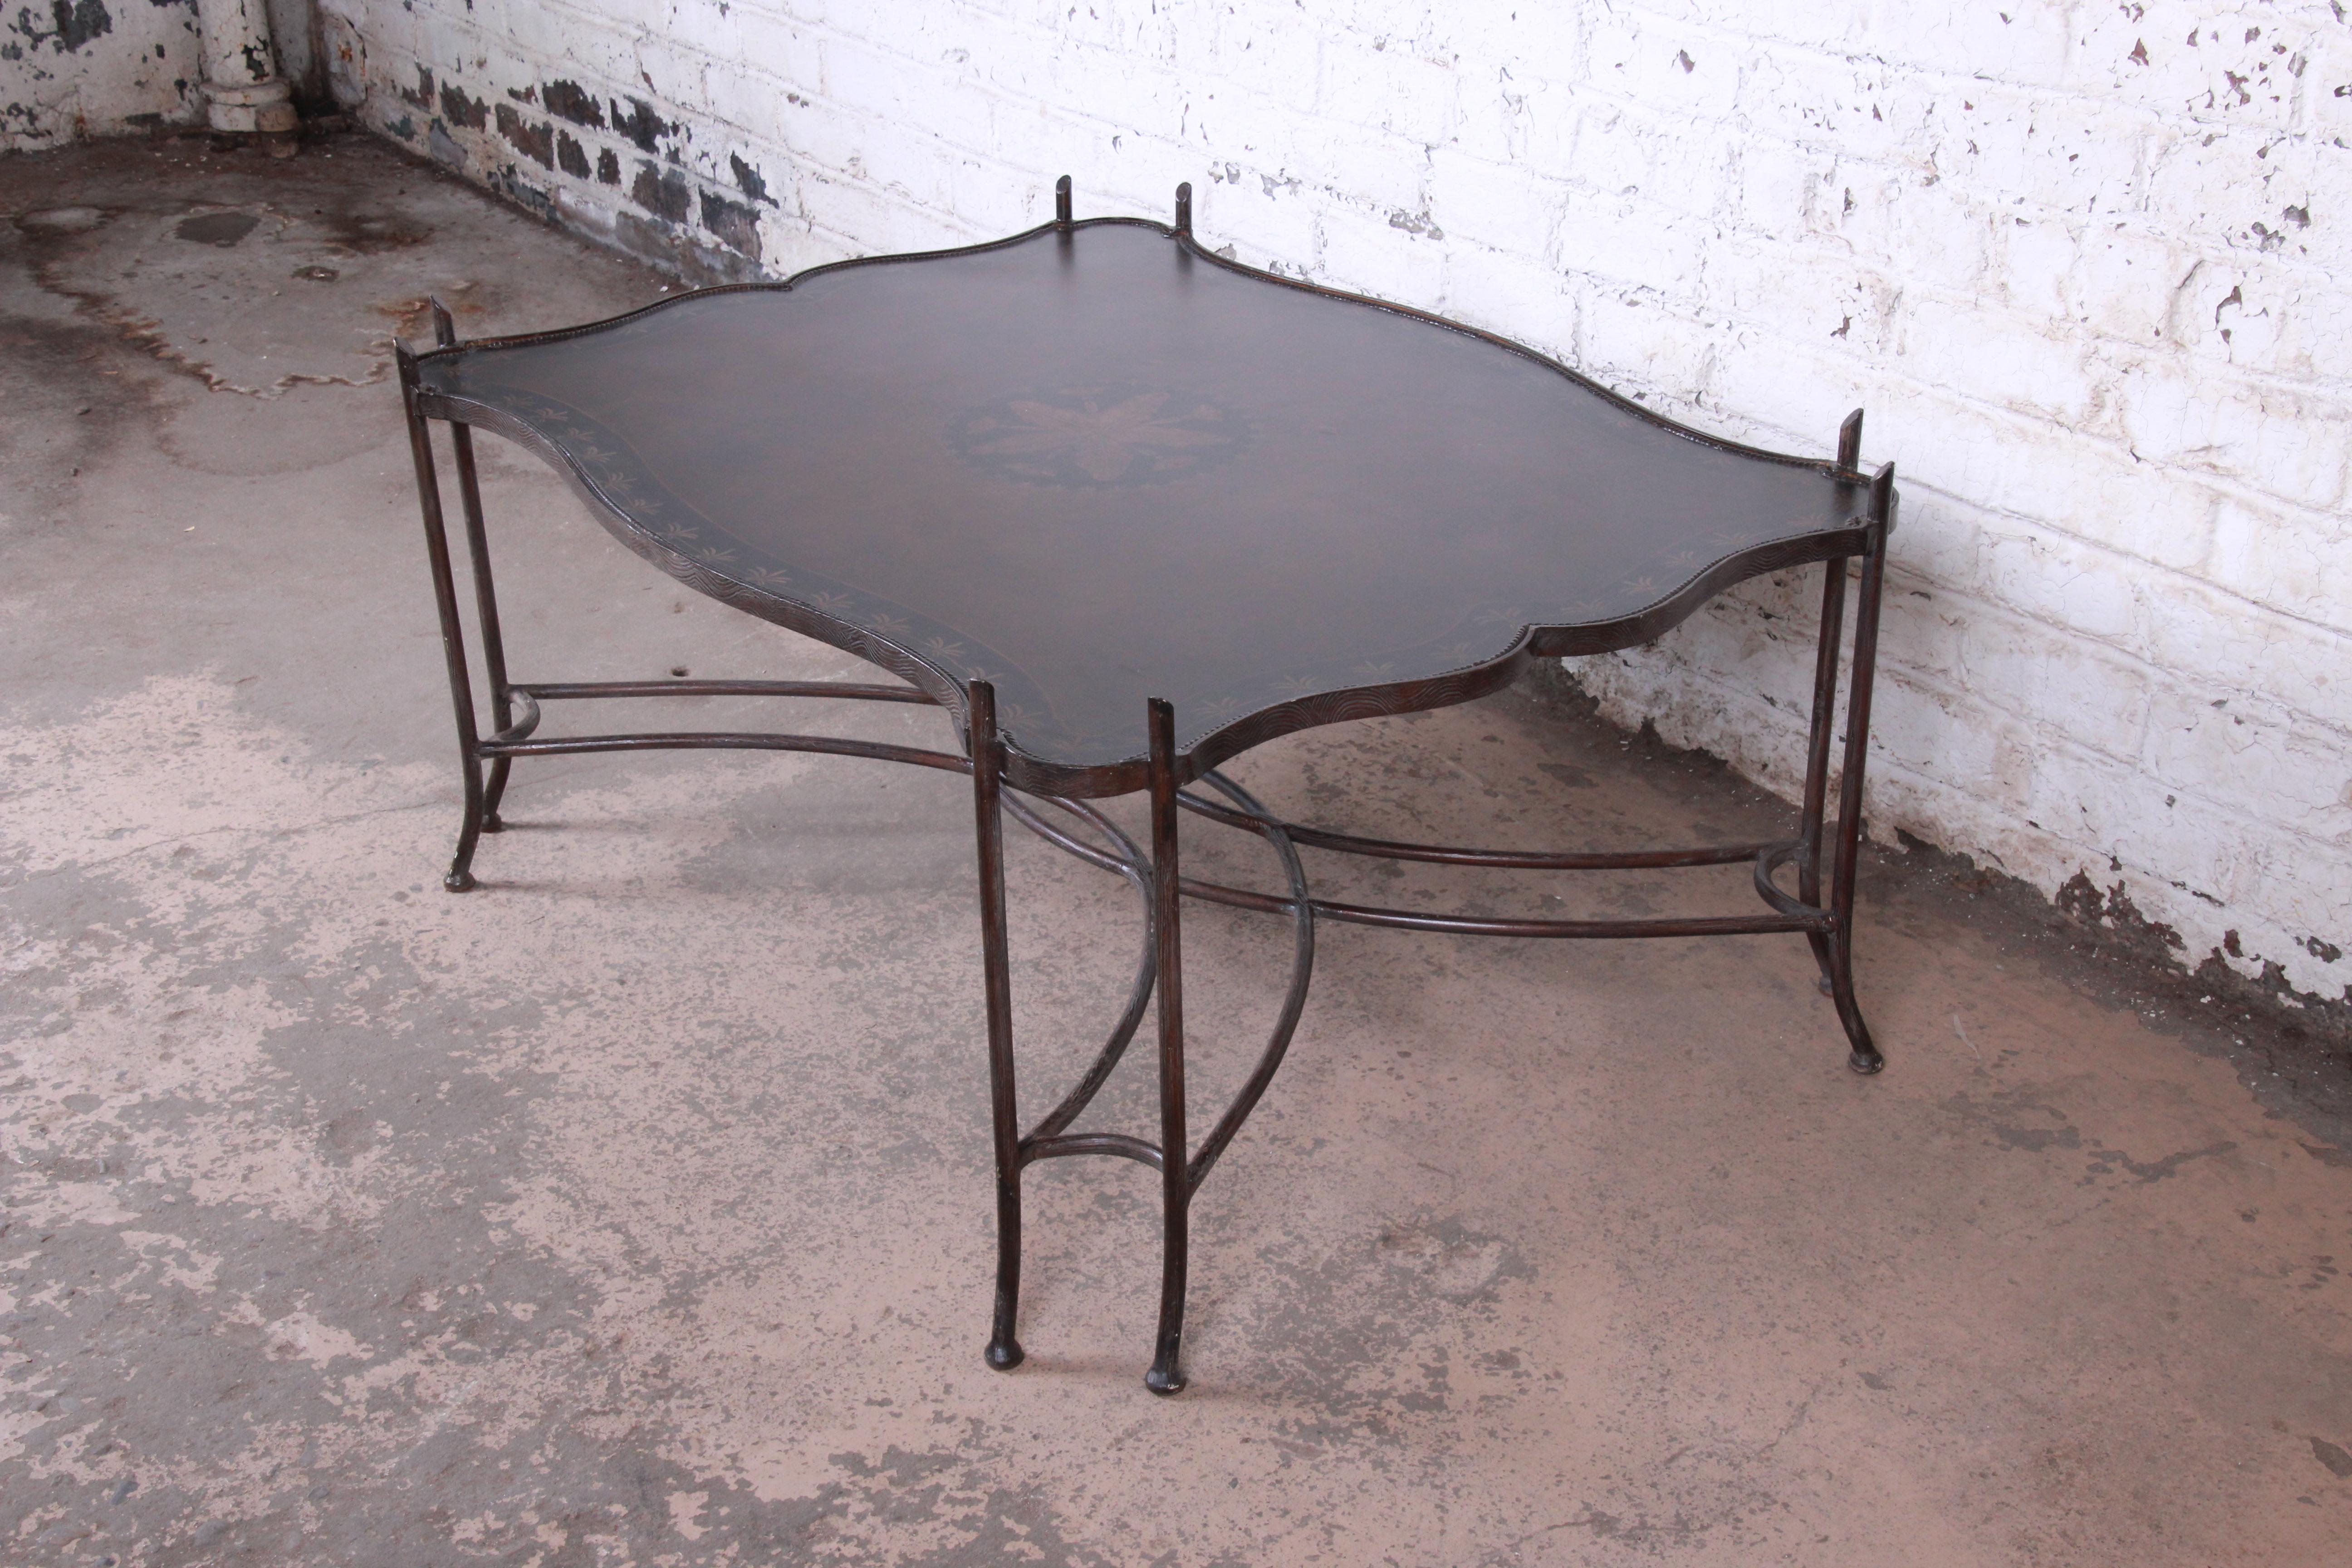 Spanish Colonial Leather and Sculptural Forged Steel Cocktail Table by Sarreid Ltd.